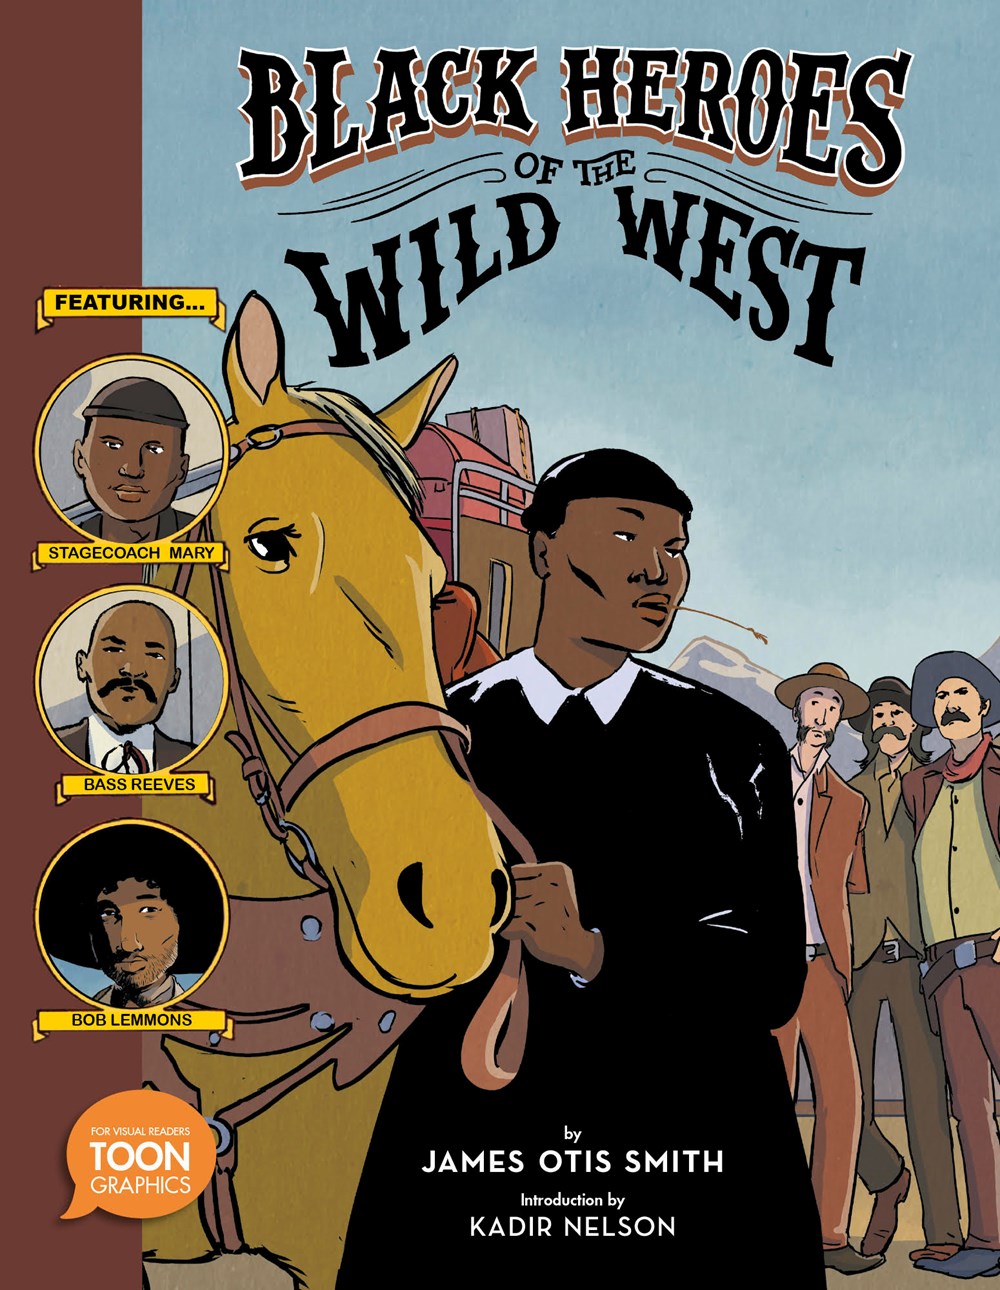 Black Heroes of the Wild West: Featuring Stagecoach Mary, Bass Reeves, and Bob Lemmons by Kadir Nelson, James Otis Smith